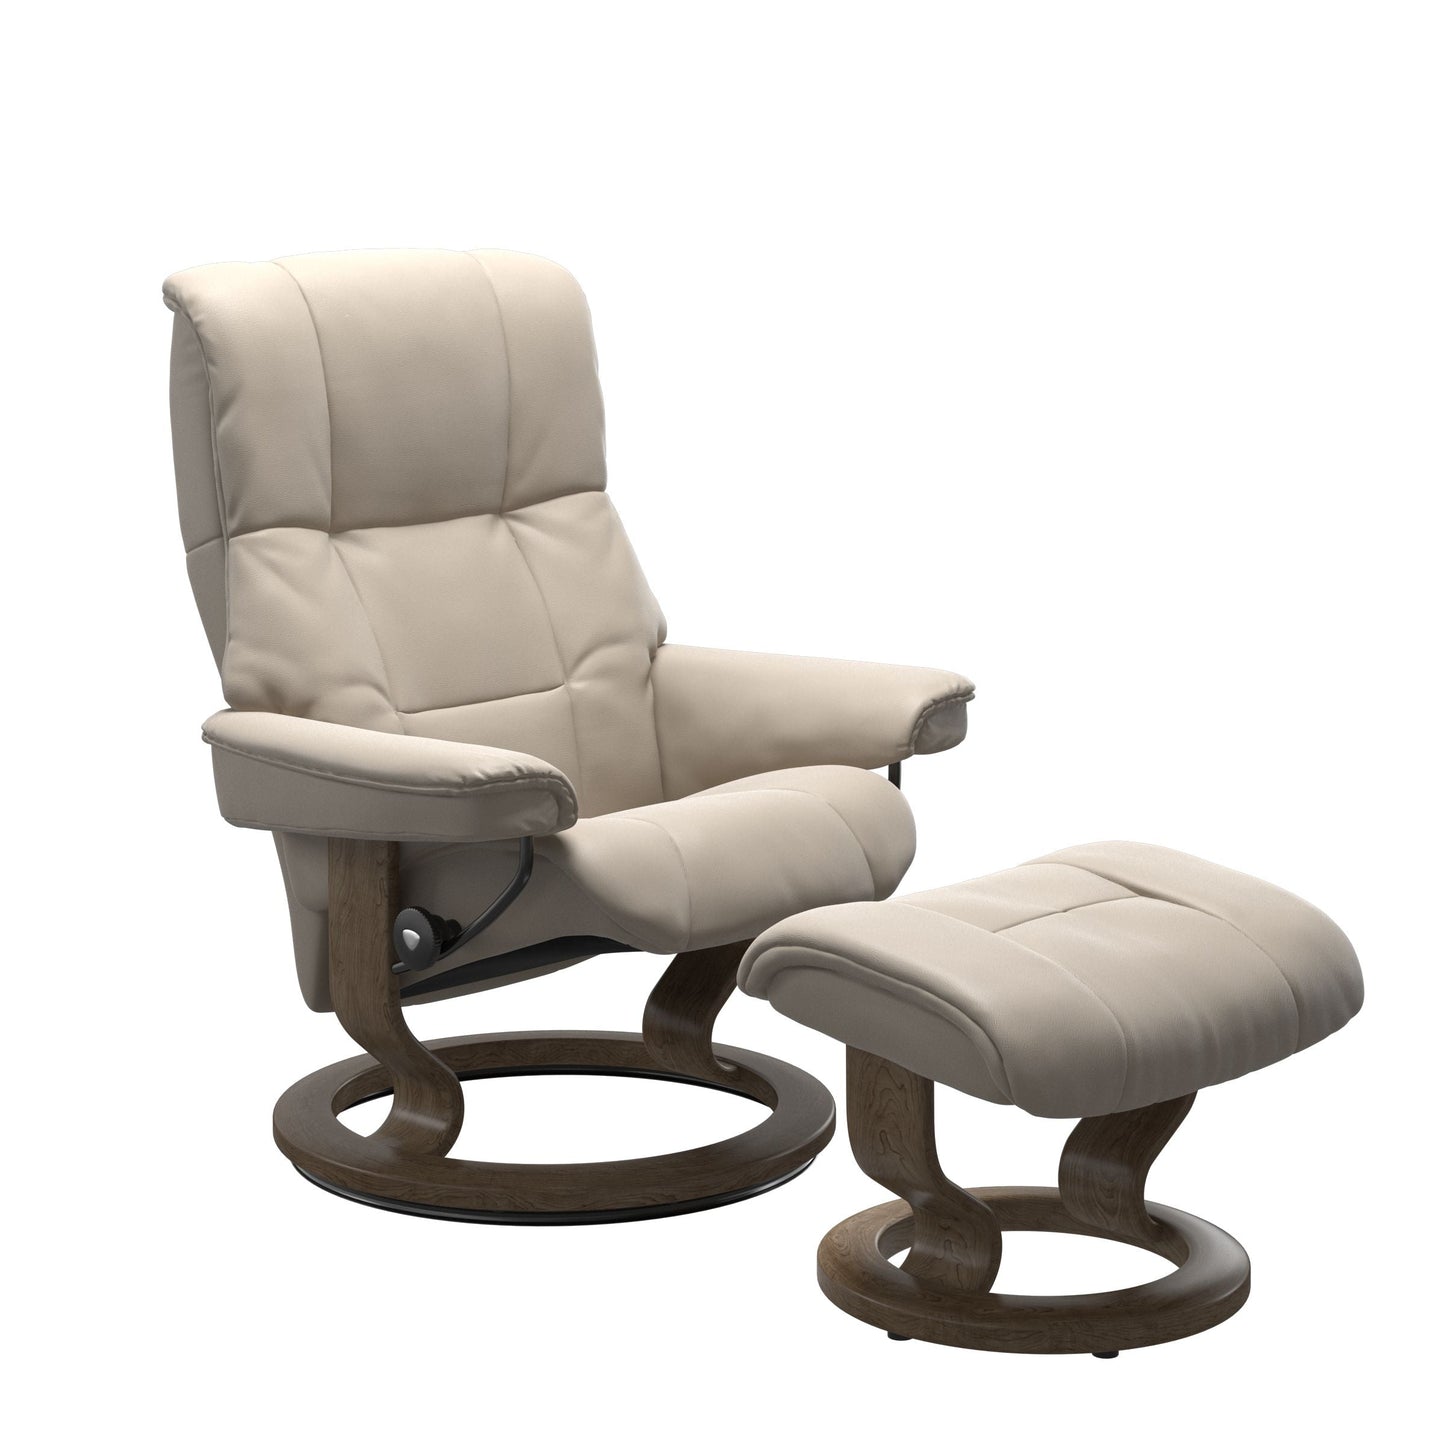 Mayfair Large Classic Recliner Chair & Stool by Stressless